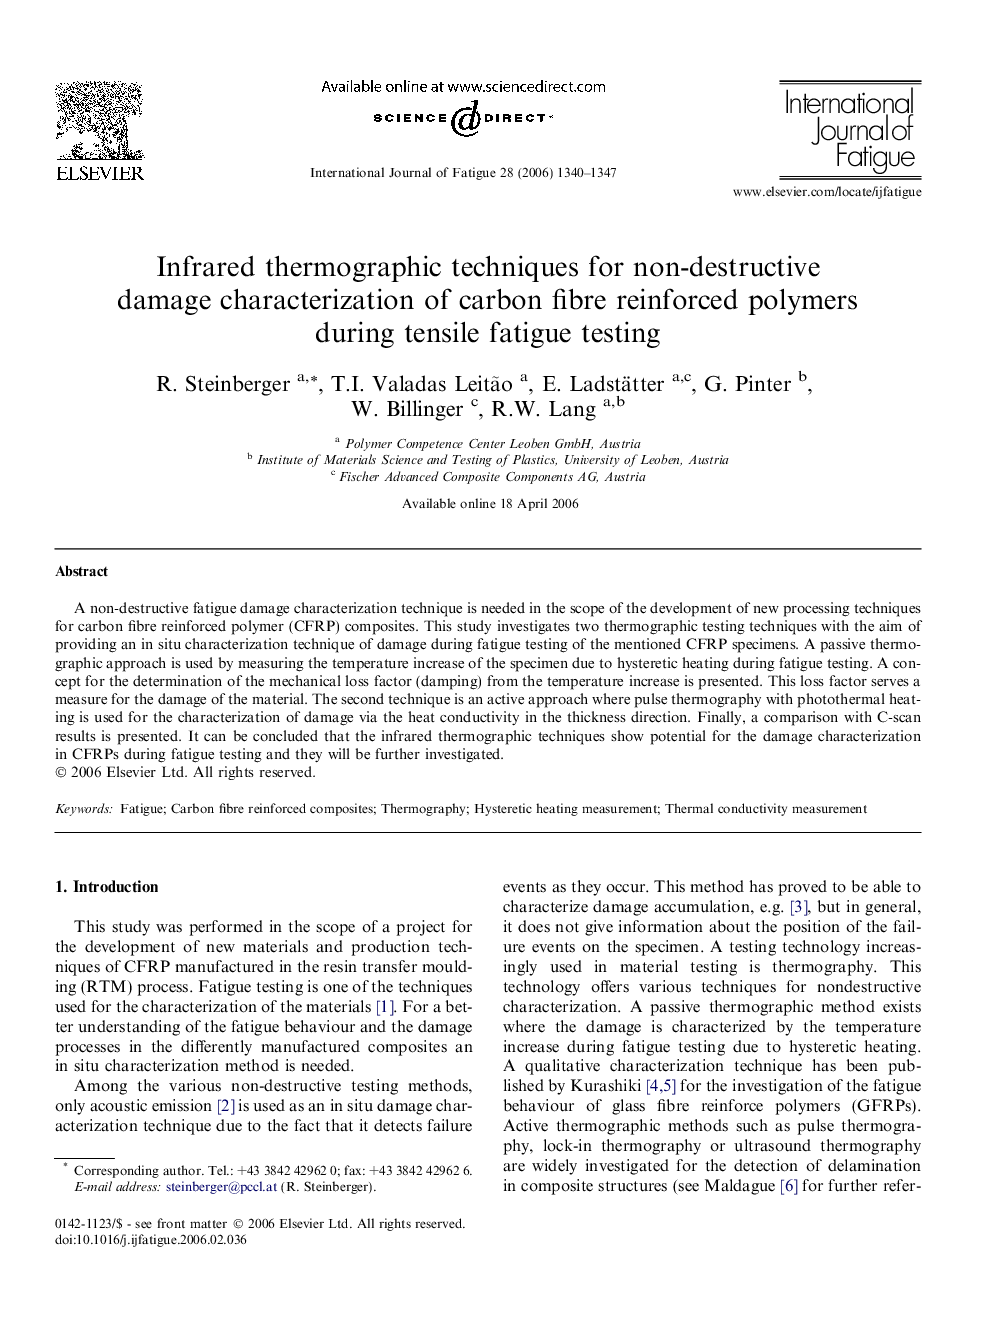 Infrared thermographic techniques for non-destructive damage characterization of carbon fibre reinforced polymers during tensile fatigue testing